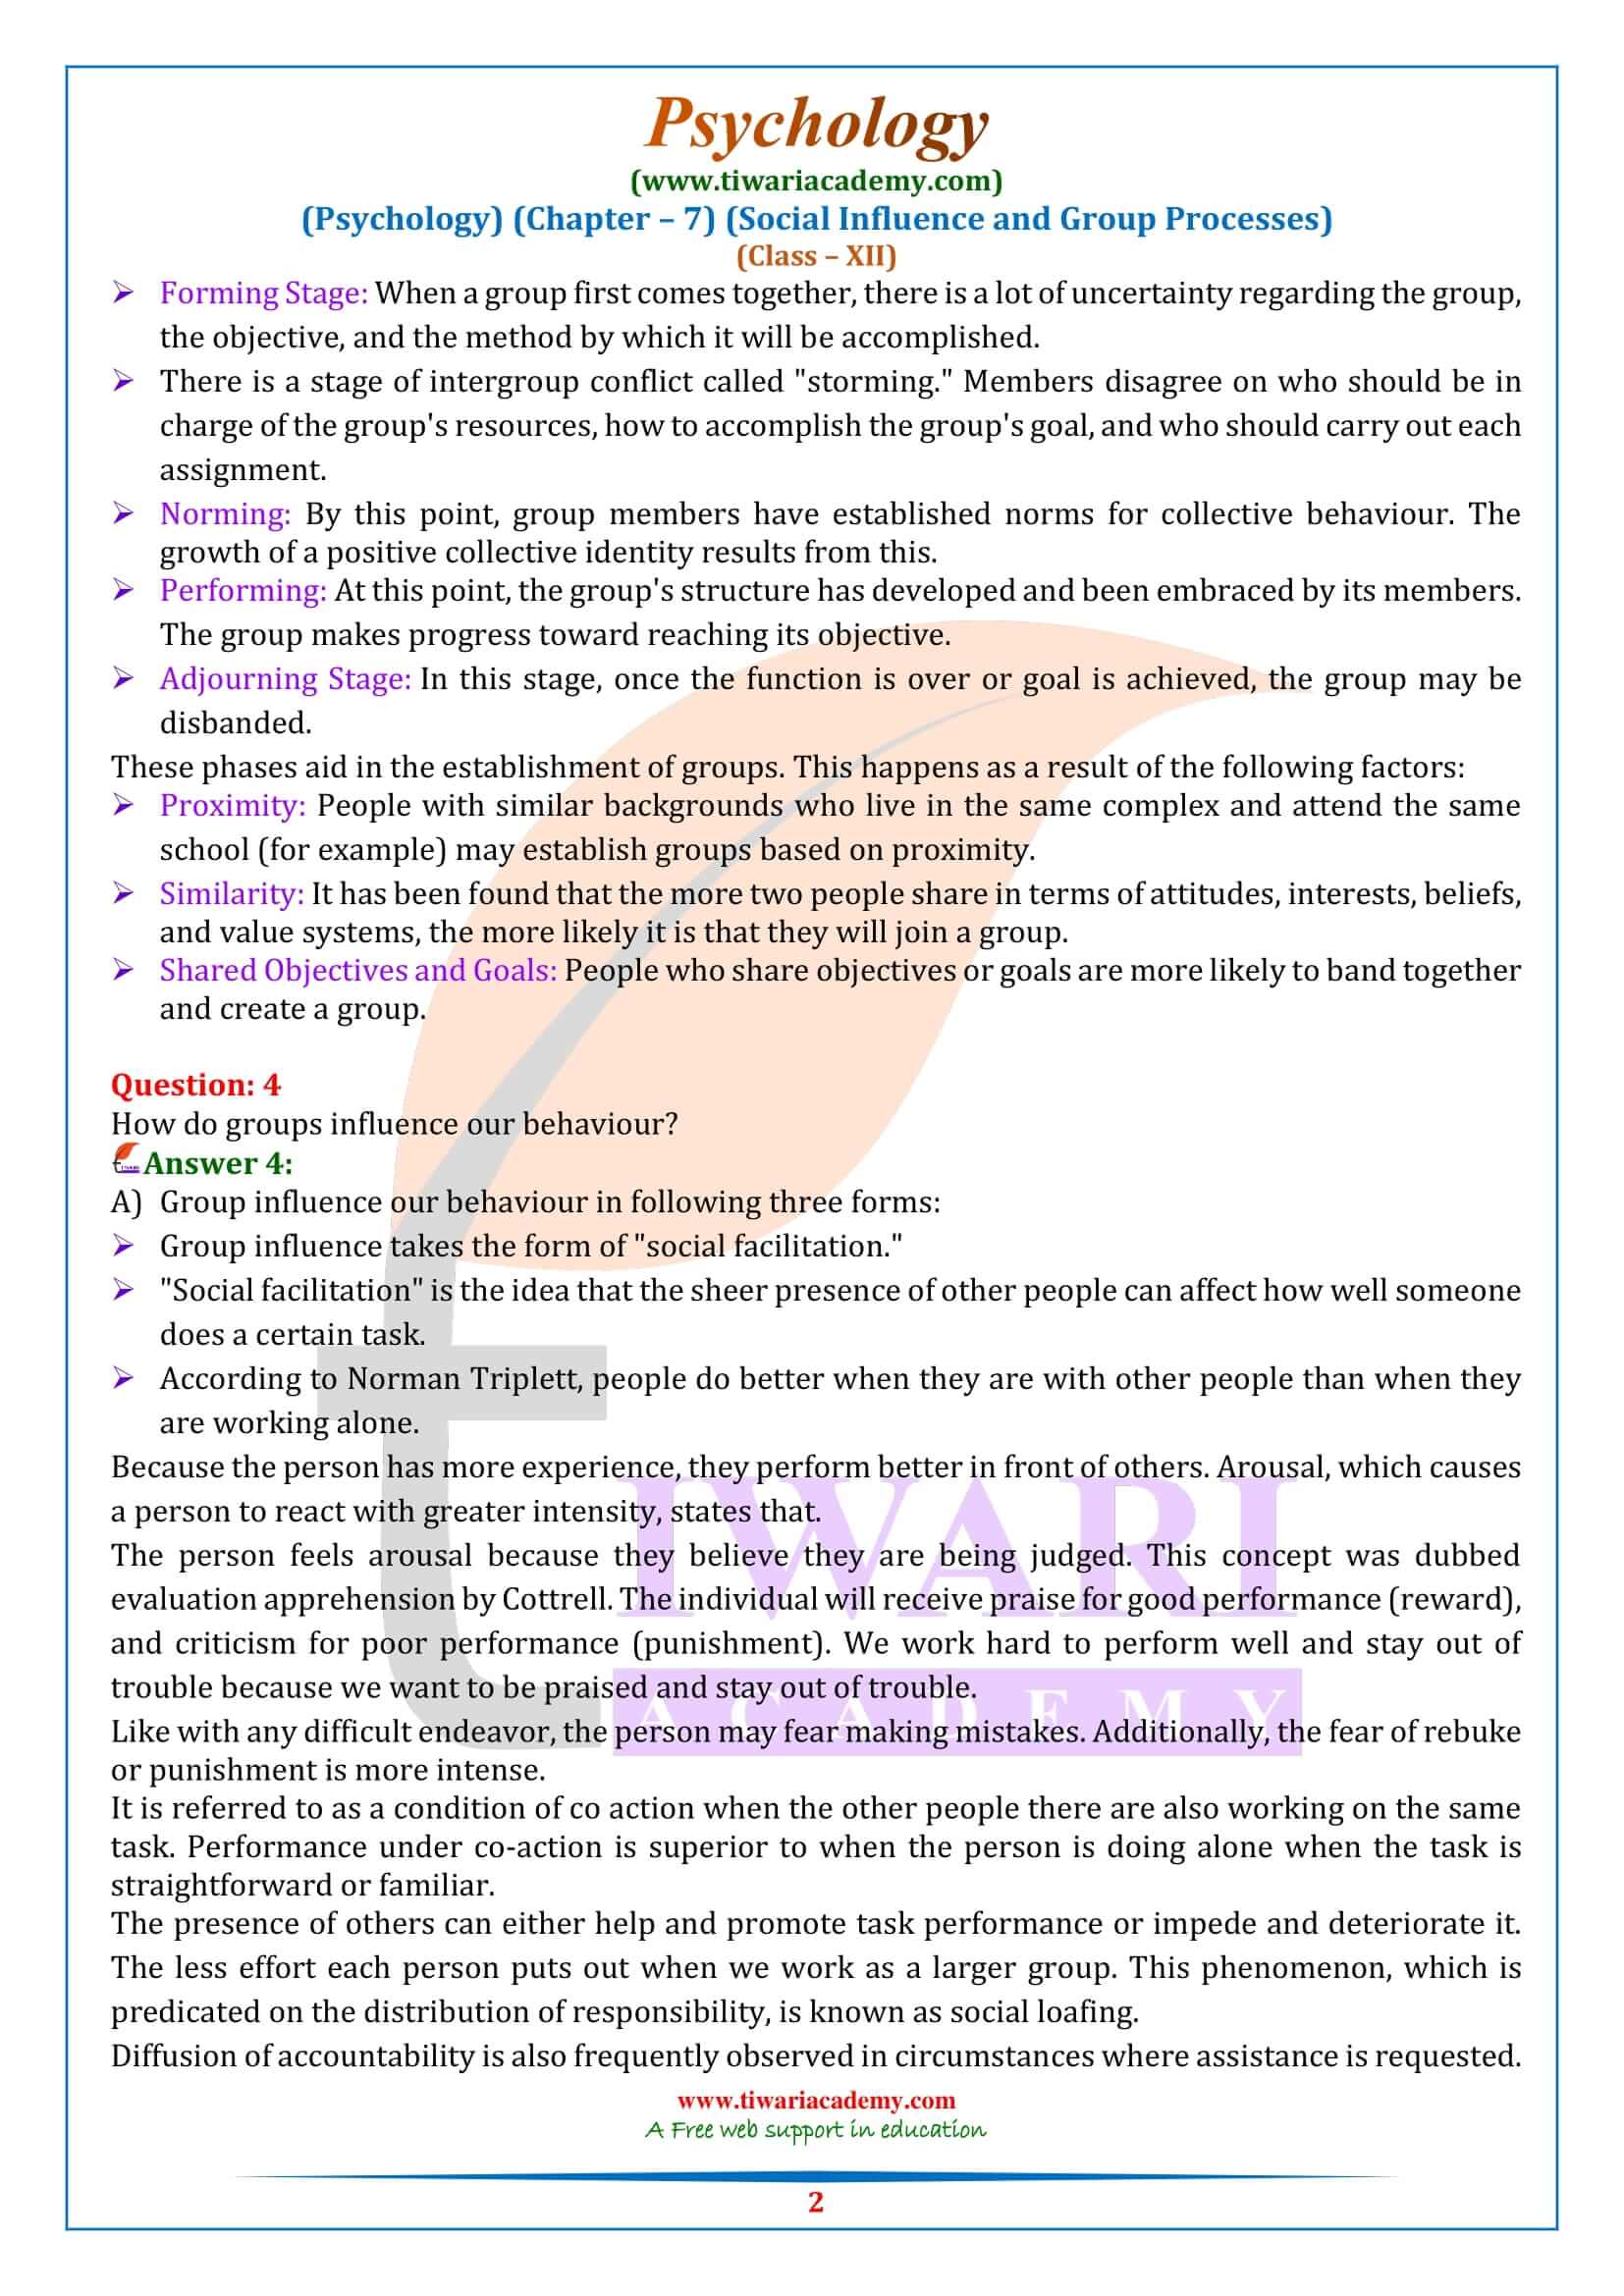 NCERT Solutions for Class 12 Psychology Chapter 7